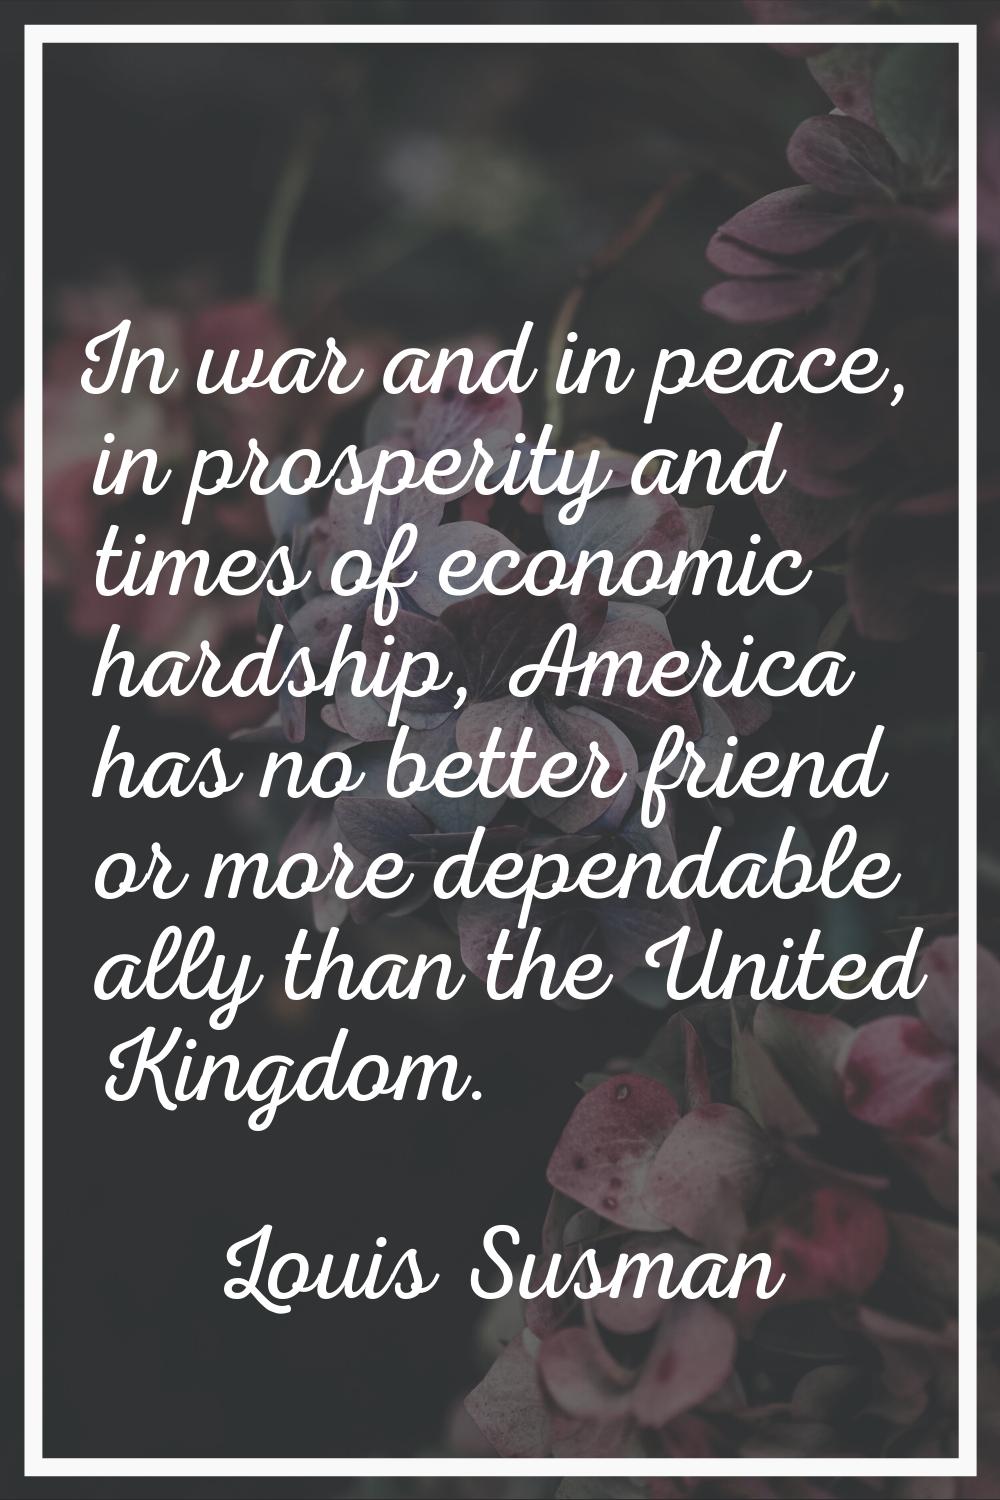 In war and in peace, in prosperity and times of economic hardship, America has no better friend or 